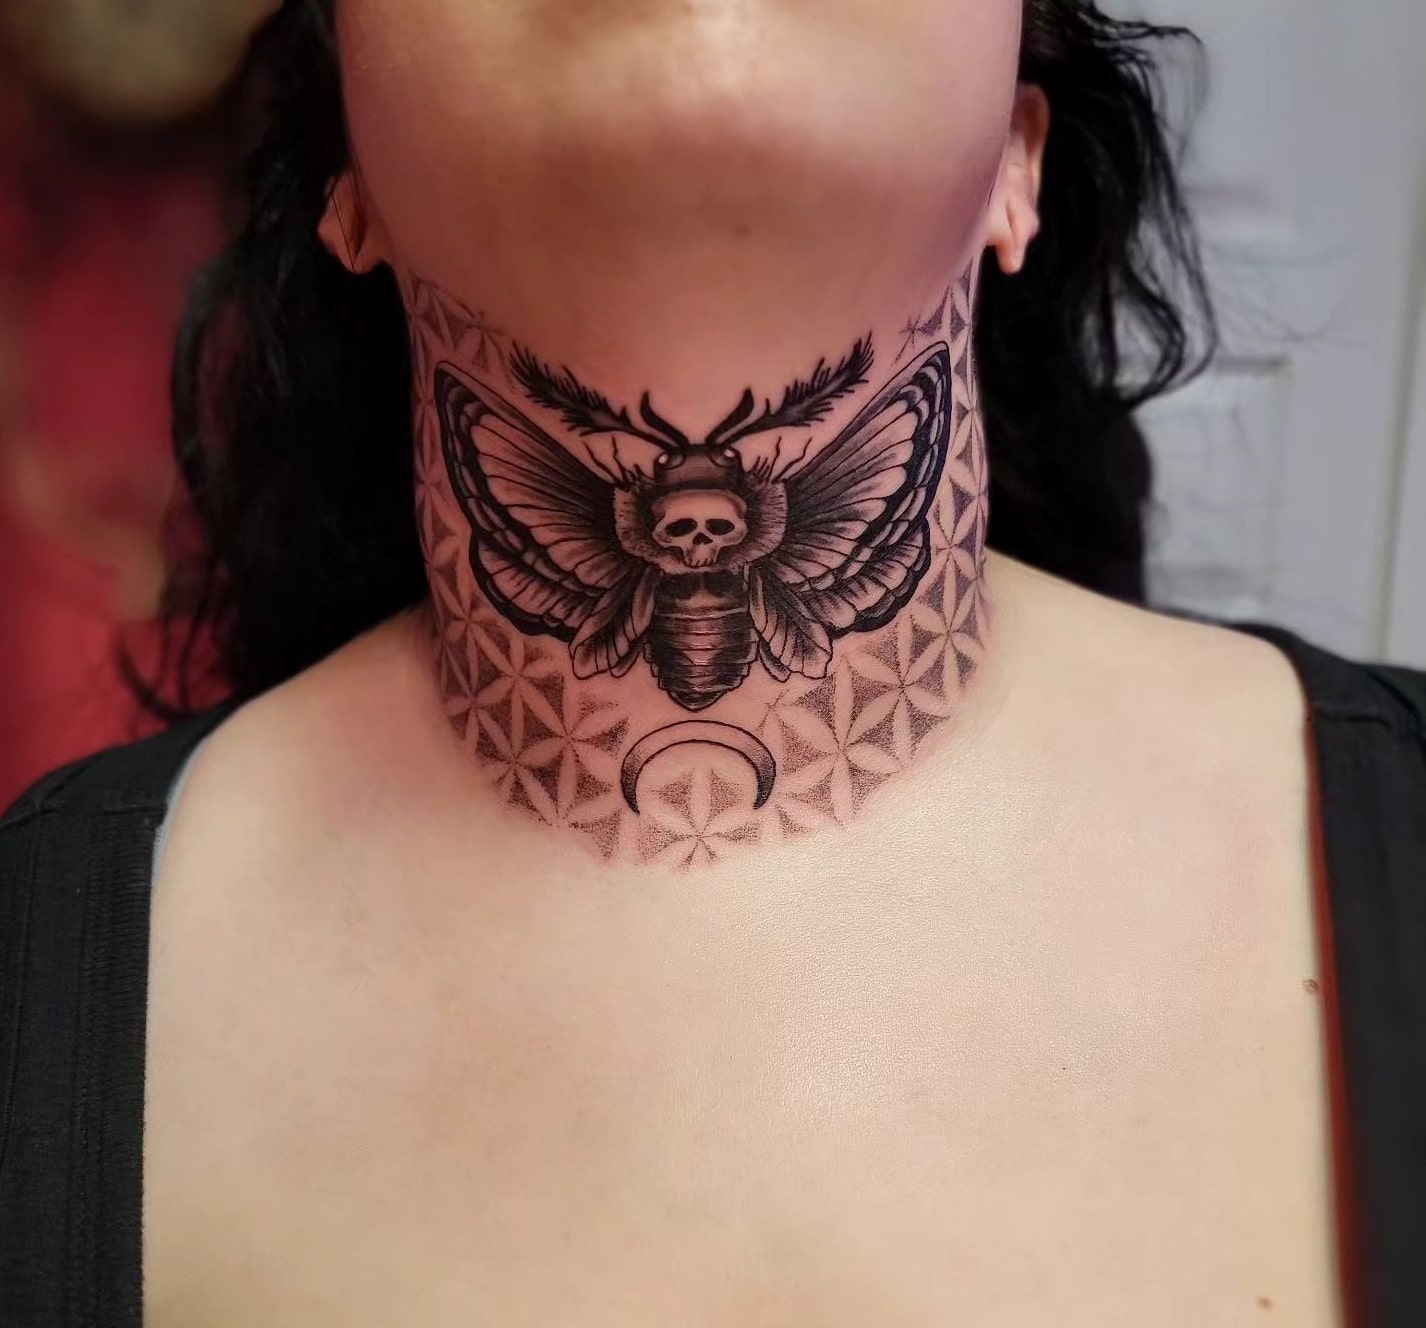 Butterfly skull neck tattoo with symbol